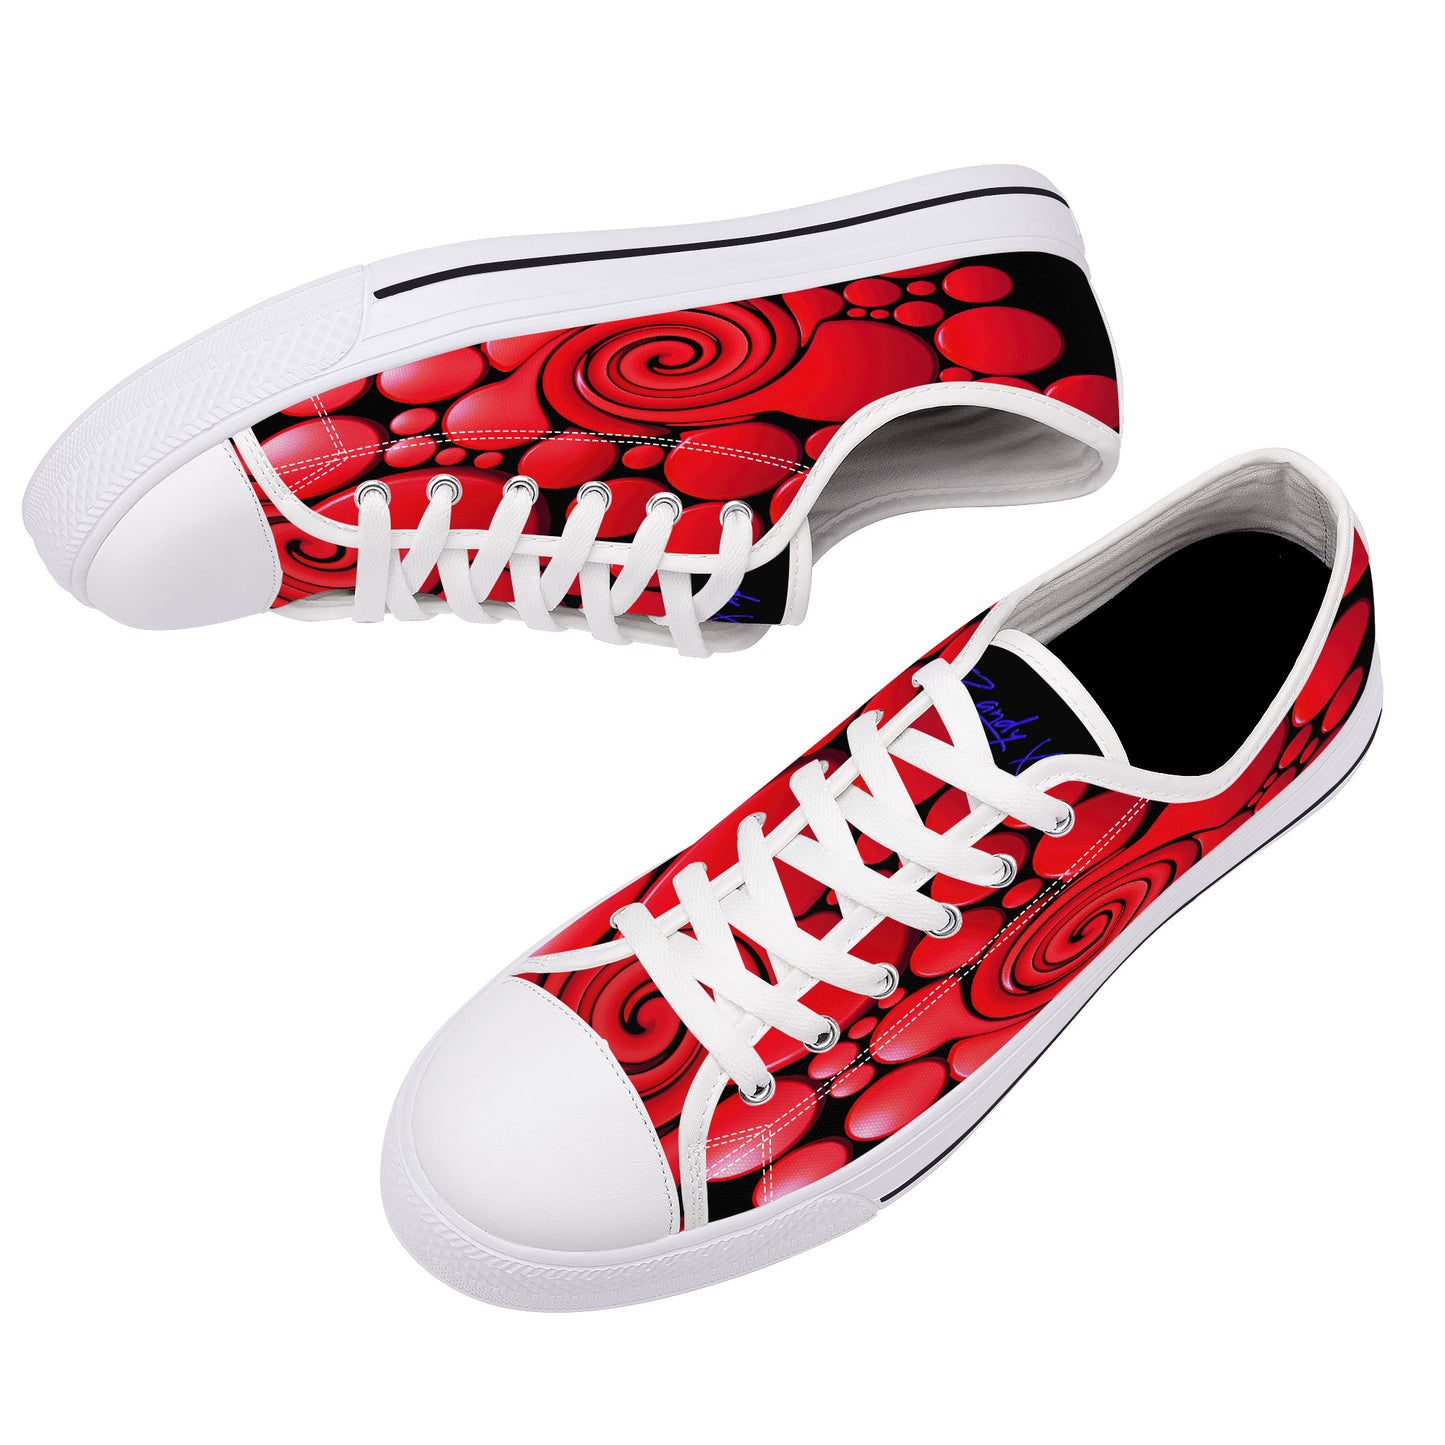 Red Twisted Ellipses Low-Top Canvas Shoes - White